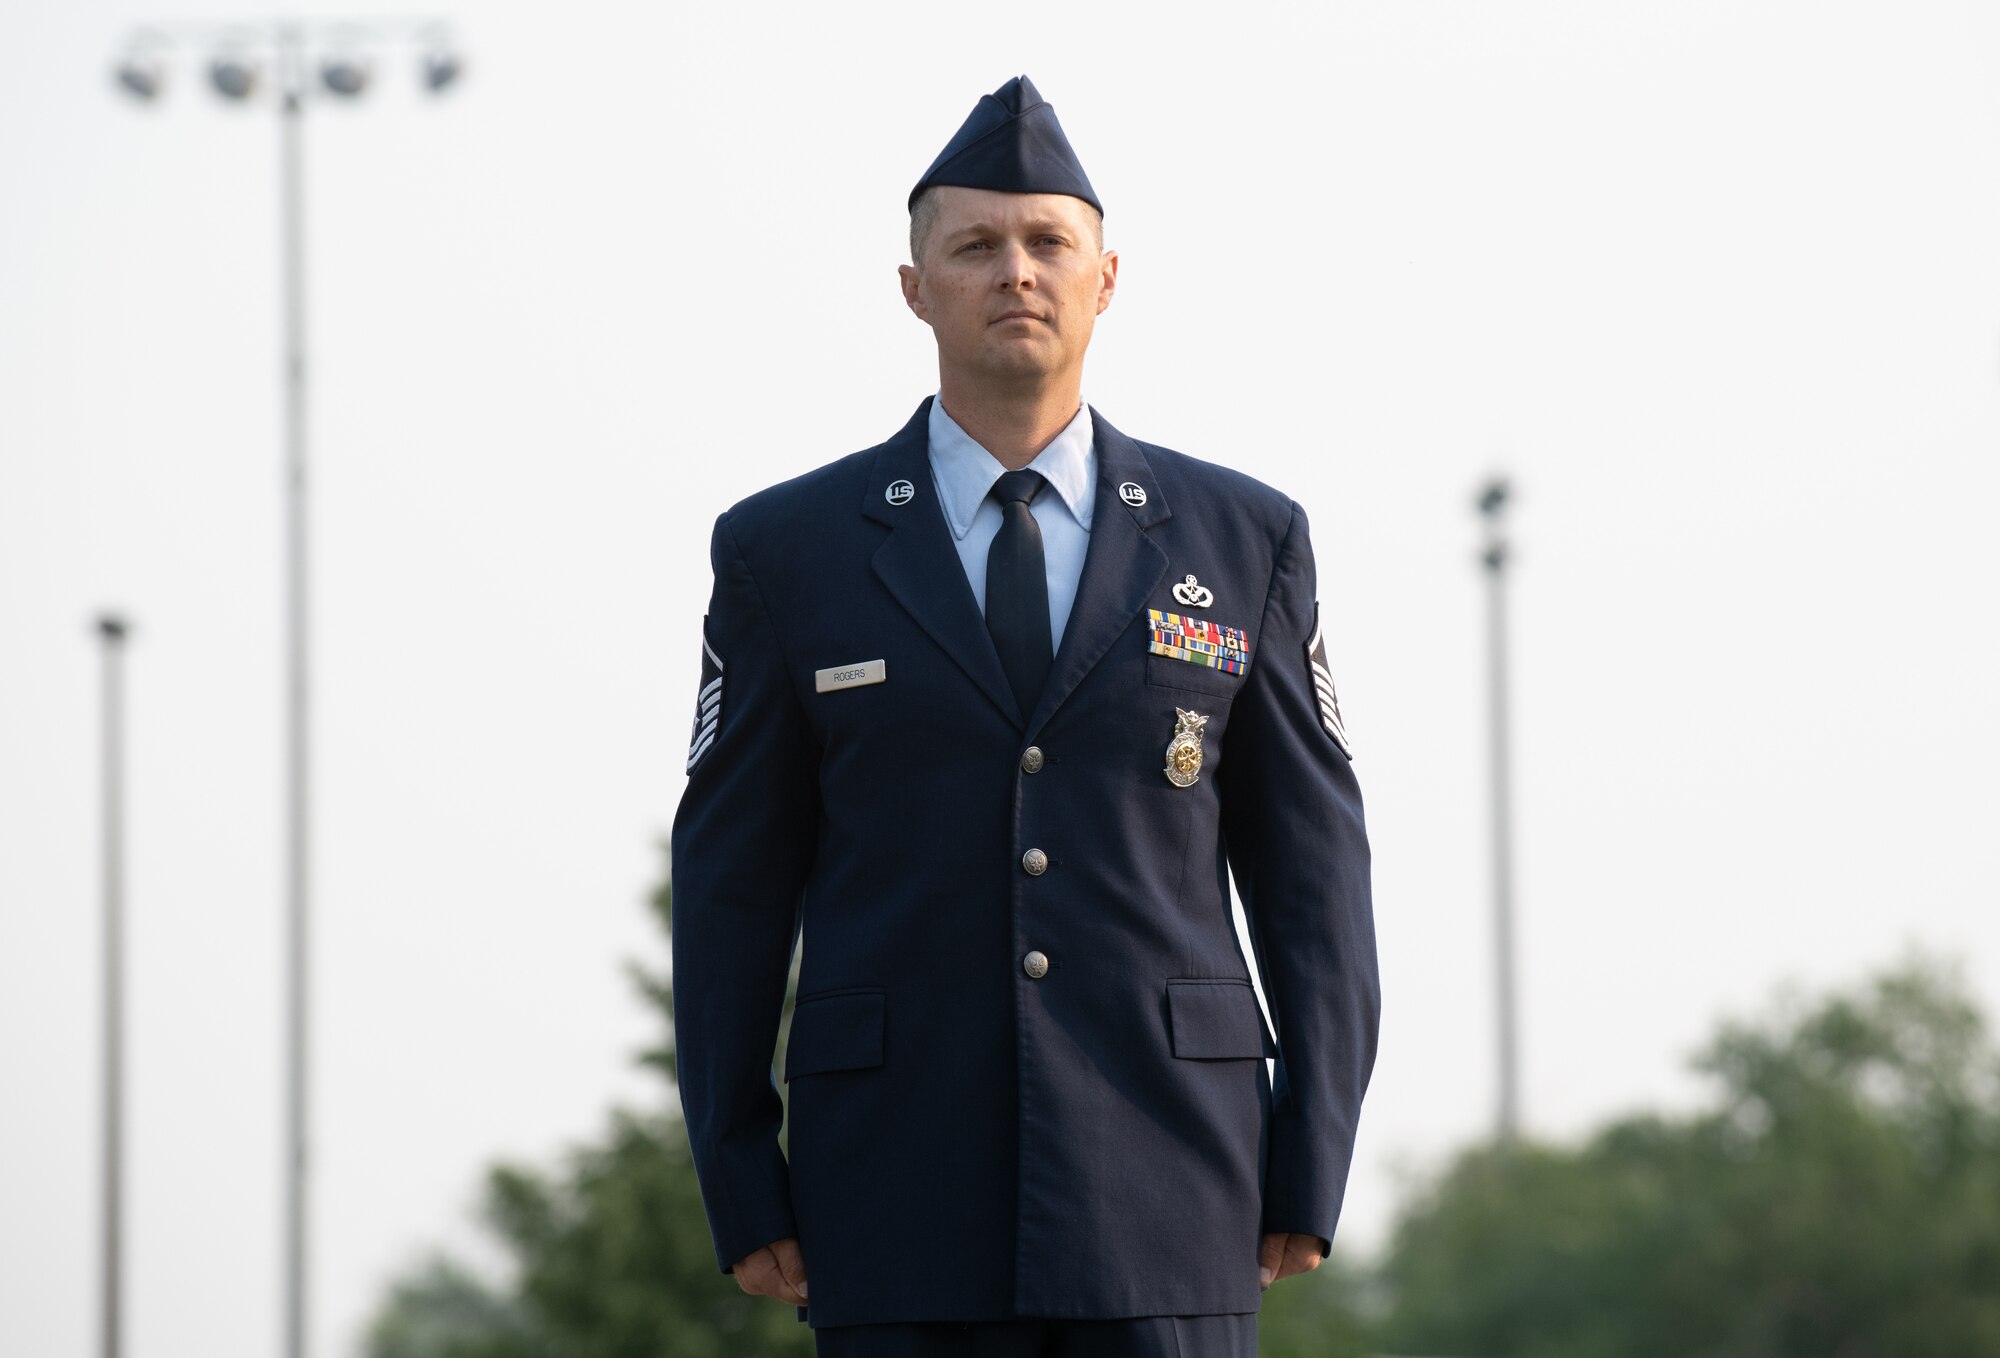 U.S. Air Force Master Sgt. Justin Rogers, 419th Civil Engineer Squadron, stands at attention before being presented the Airman’s Medal at Hill Air Force Base, Utah on July 11, 2021. The Airman’s Medal is a distinguished decoration awarded to those who display heroism or acts of heroism that involve a voluntary risk of life under non-combat conditions.